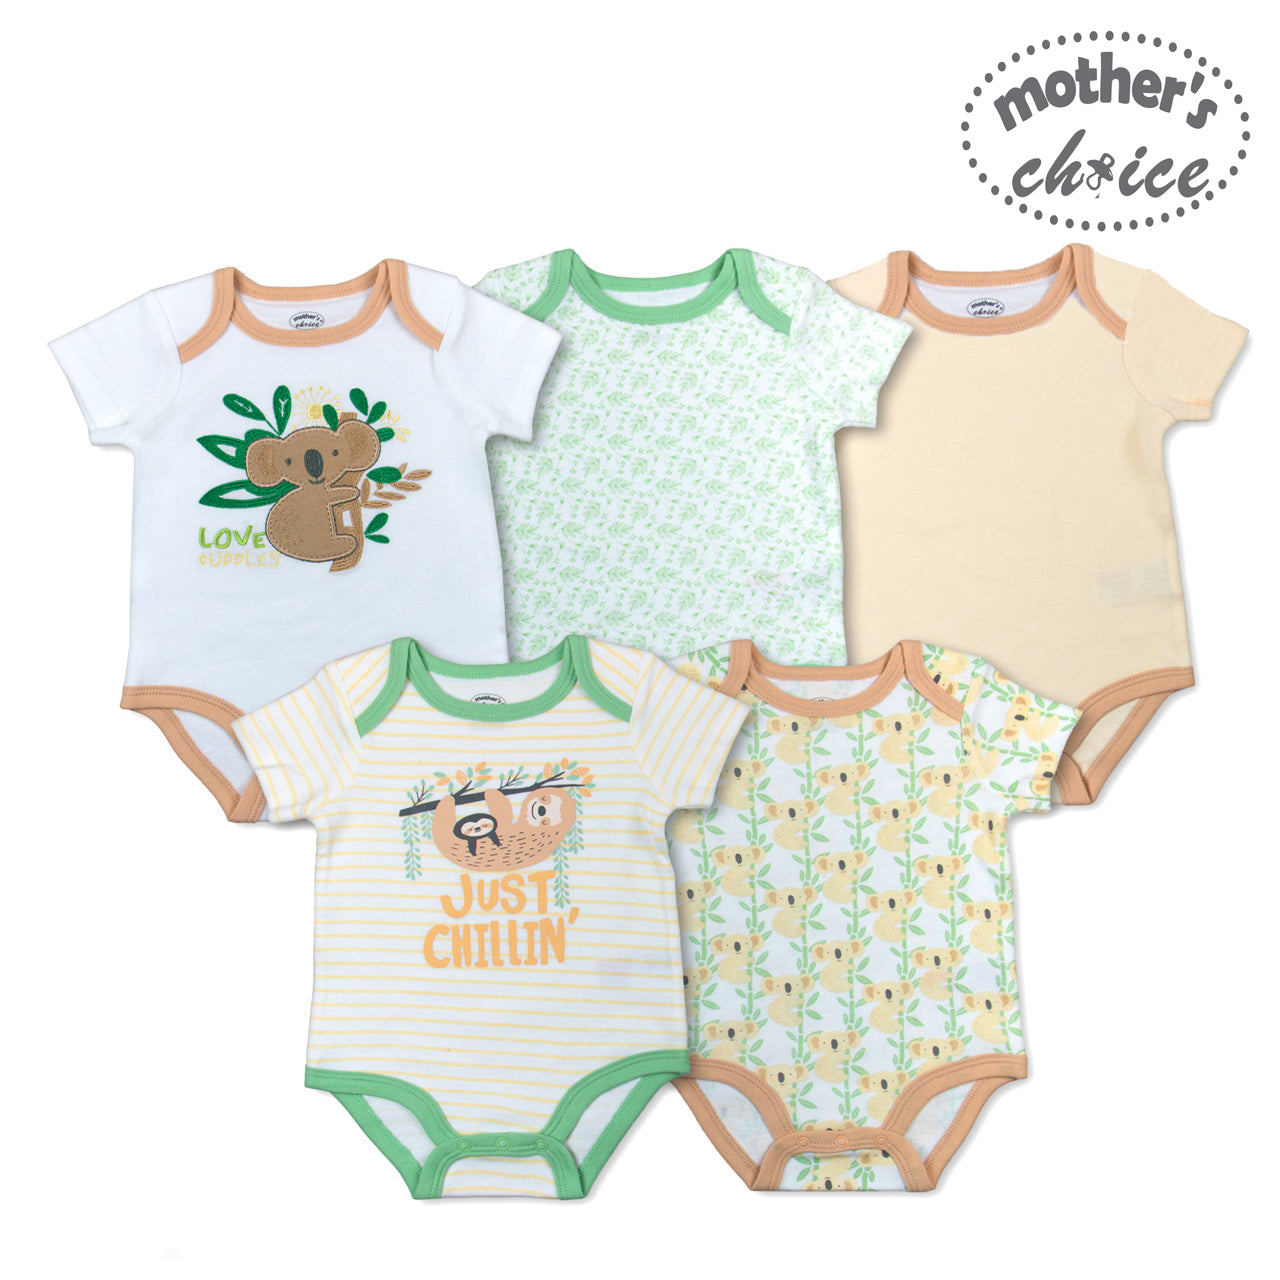 Mother's Choice 5 Pack Short Sleeve Onesie (Just Chillin/IT2488)